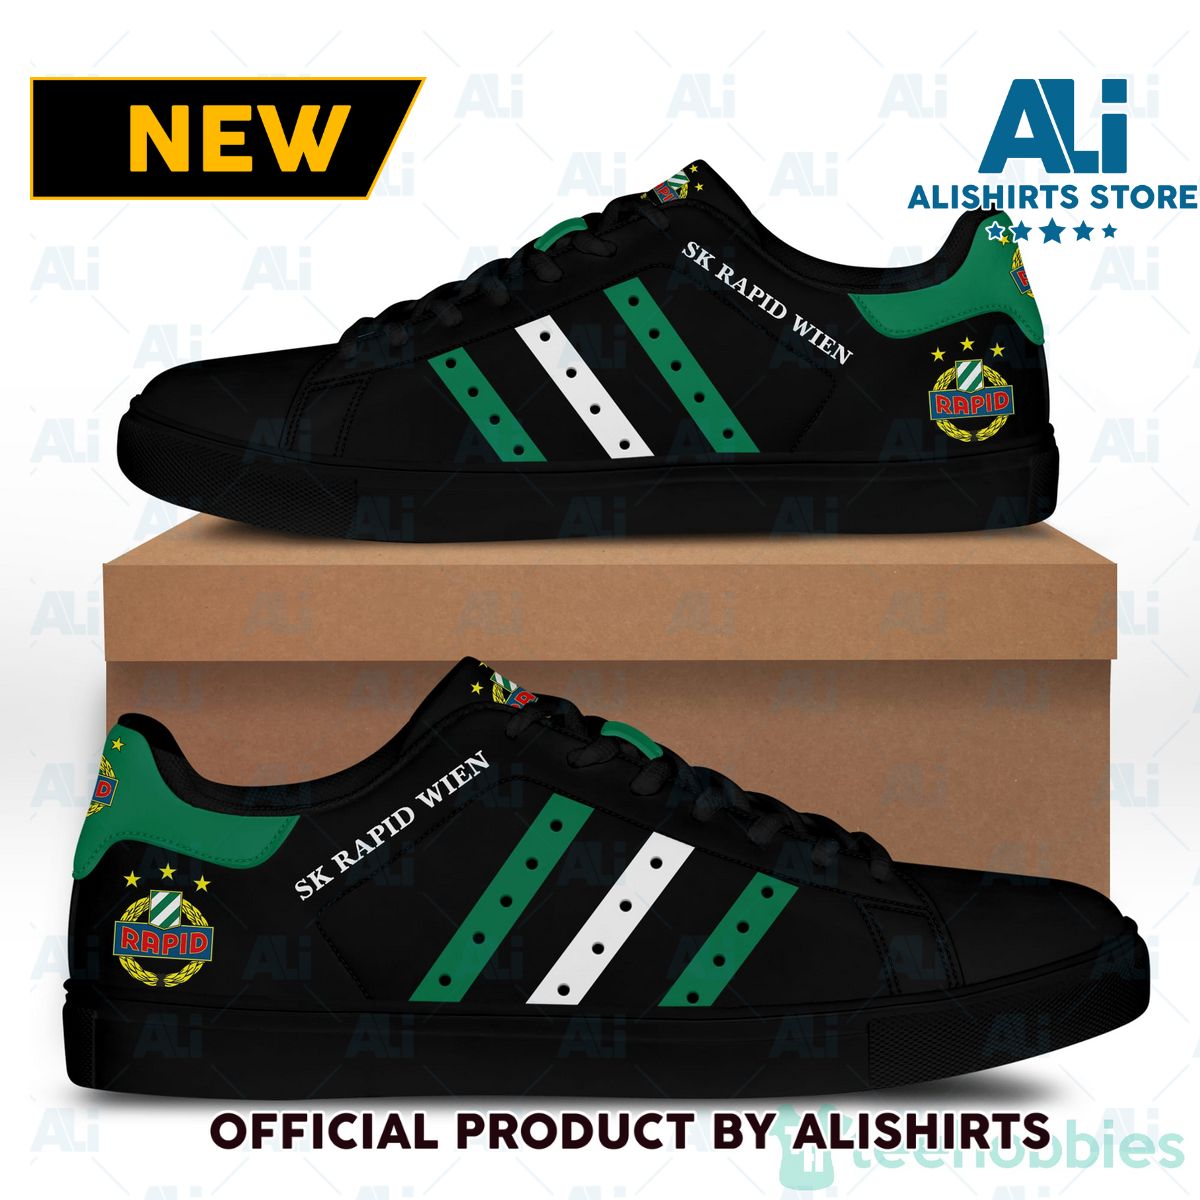 Sk Rapid Wien black And Green Adidas Stan Smith Low Top Skate Shoes